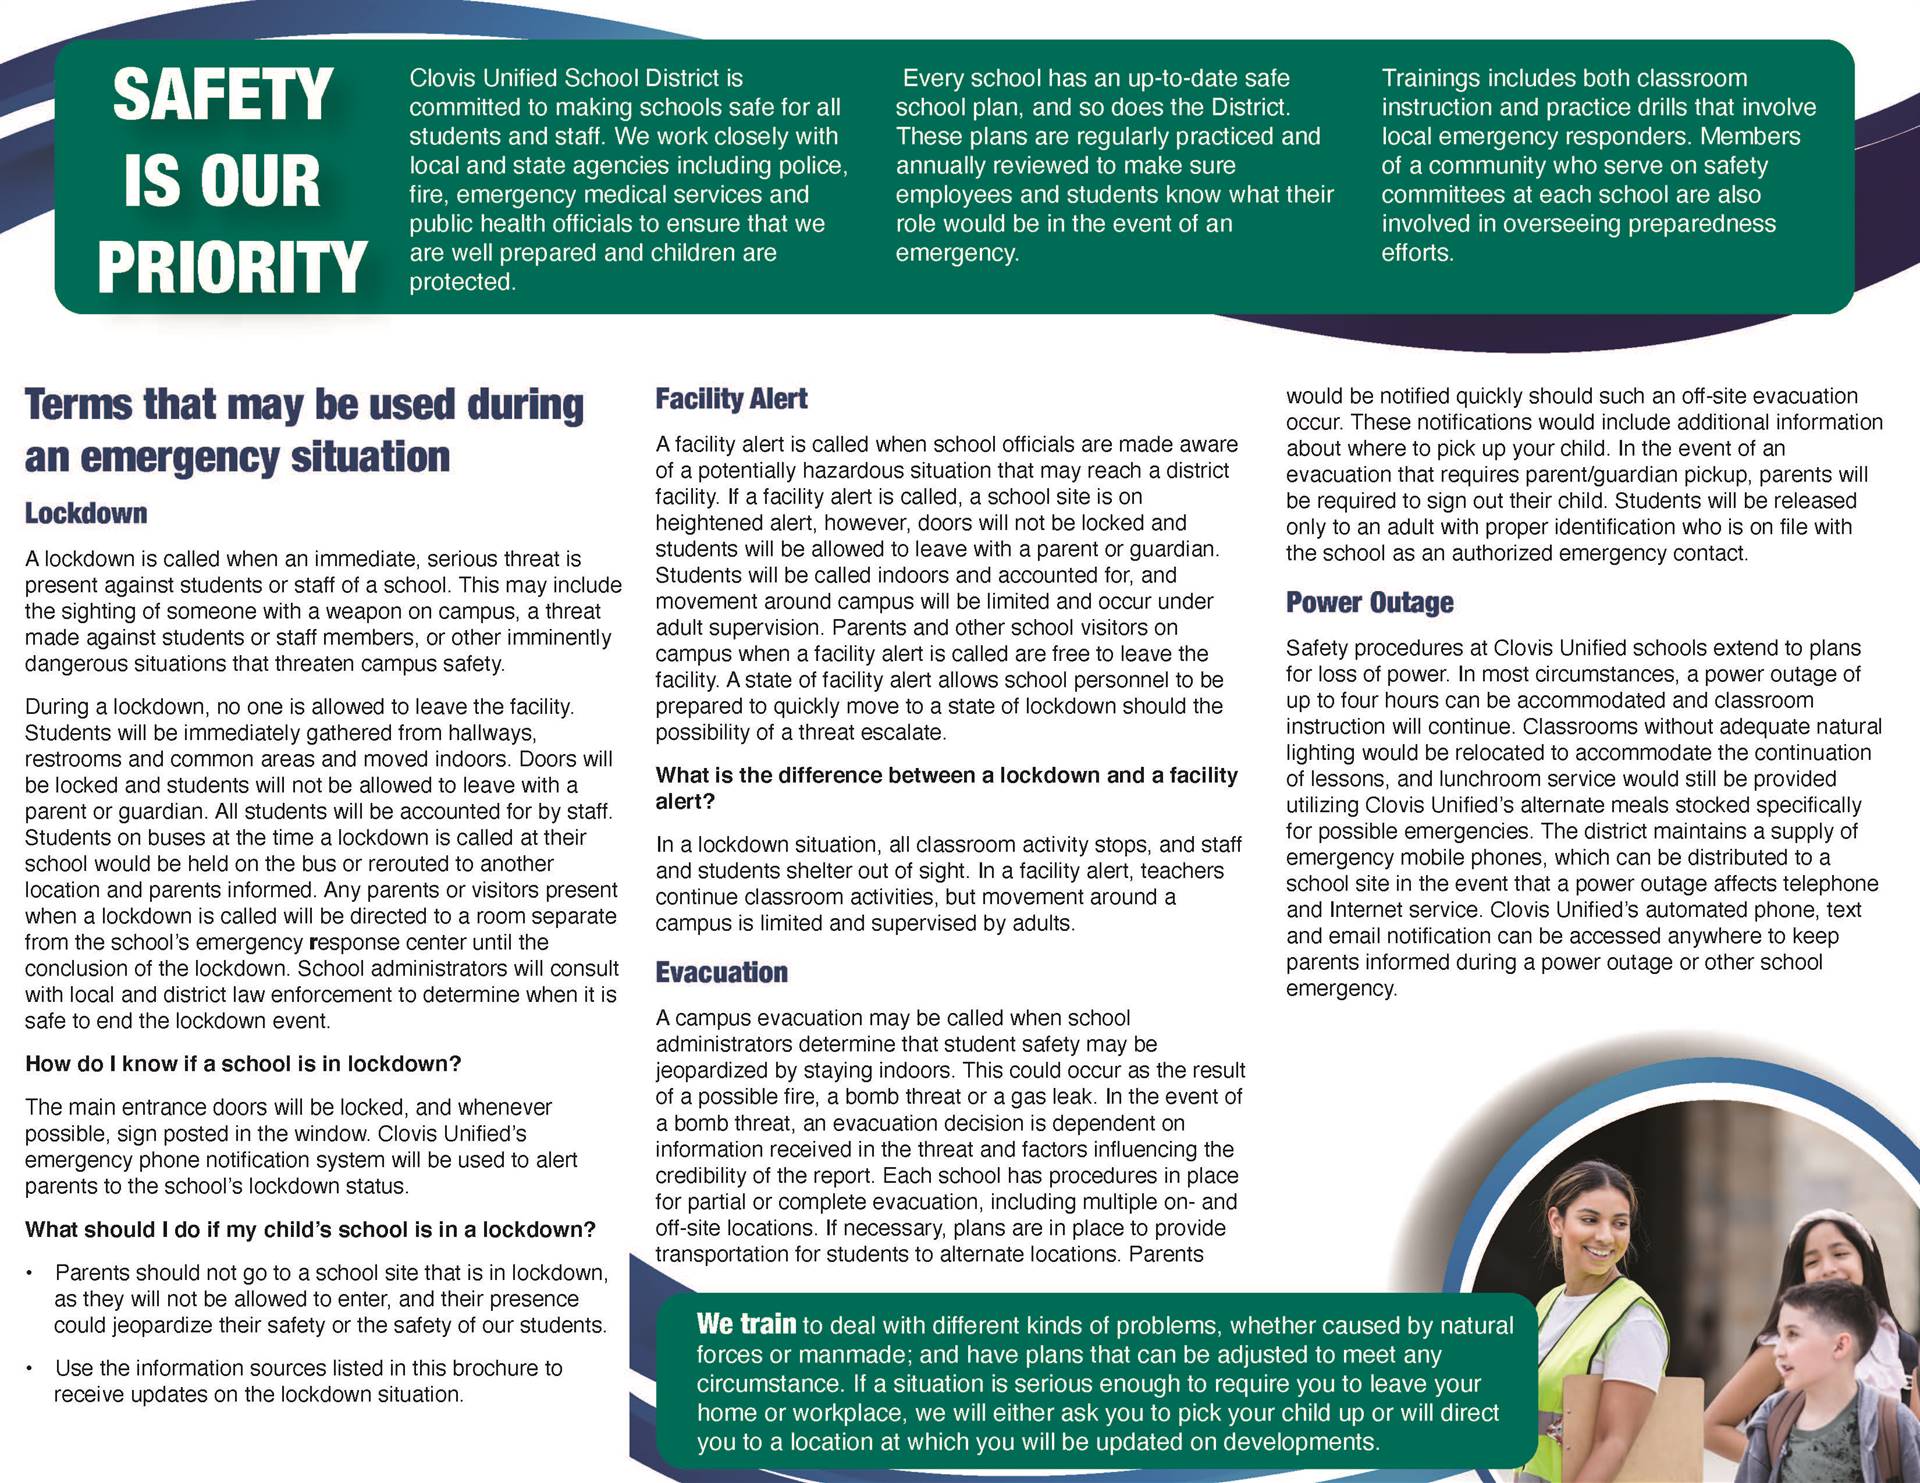 CUSD Safety Brochure - Full text downloadable at right